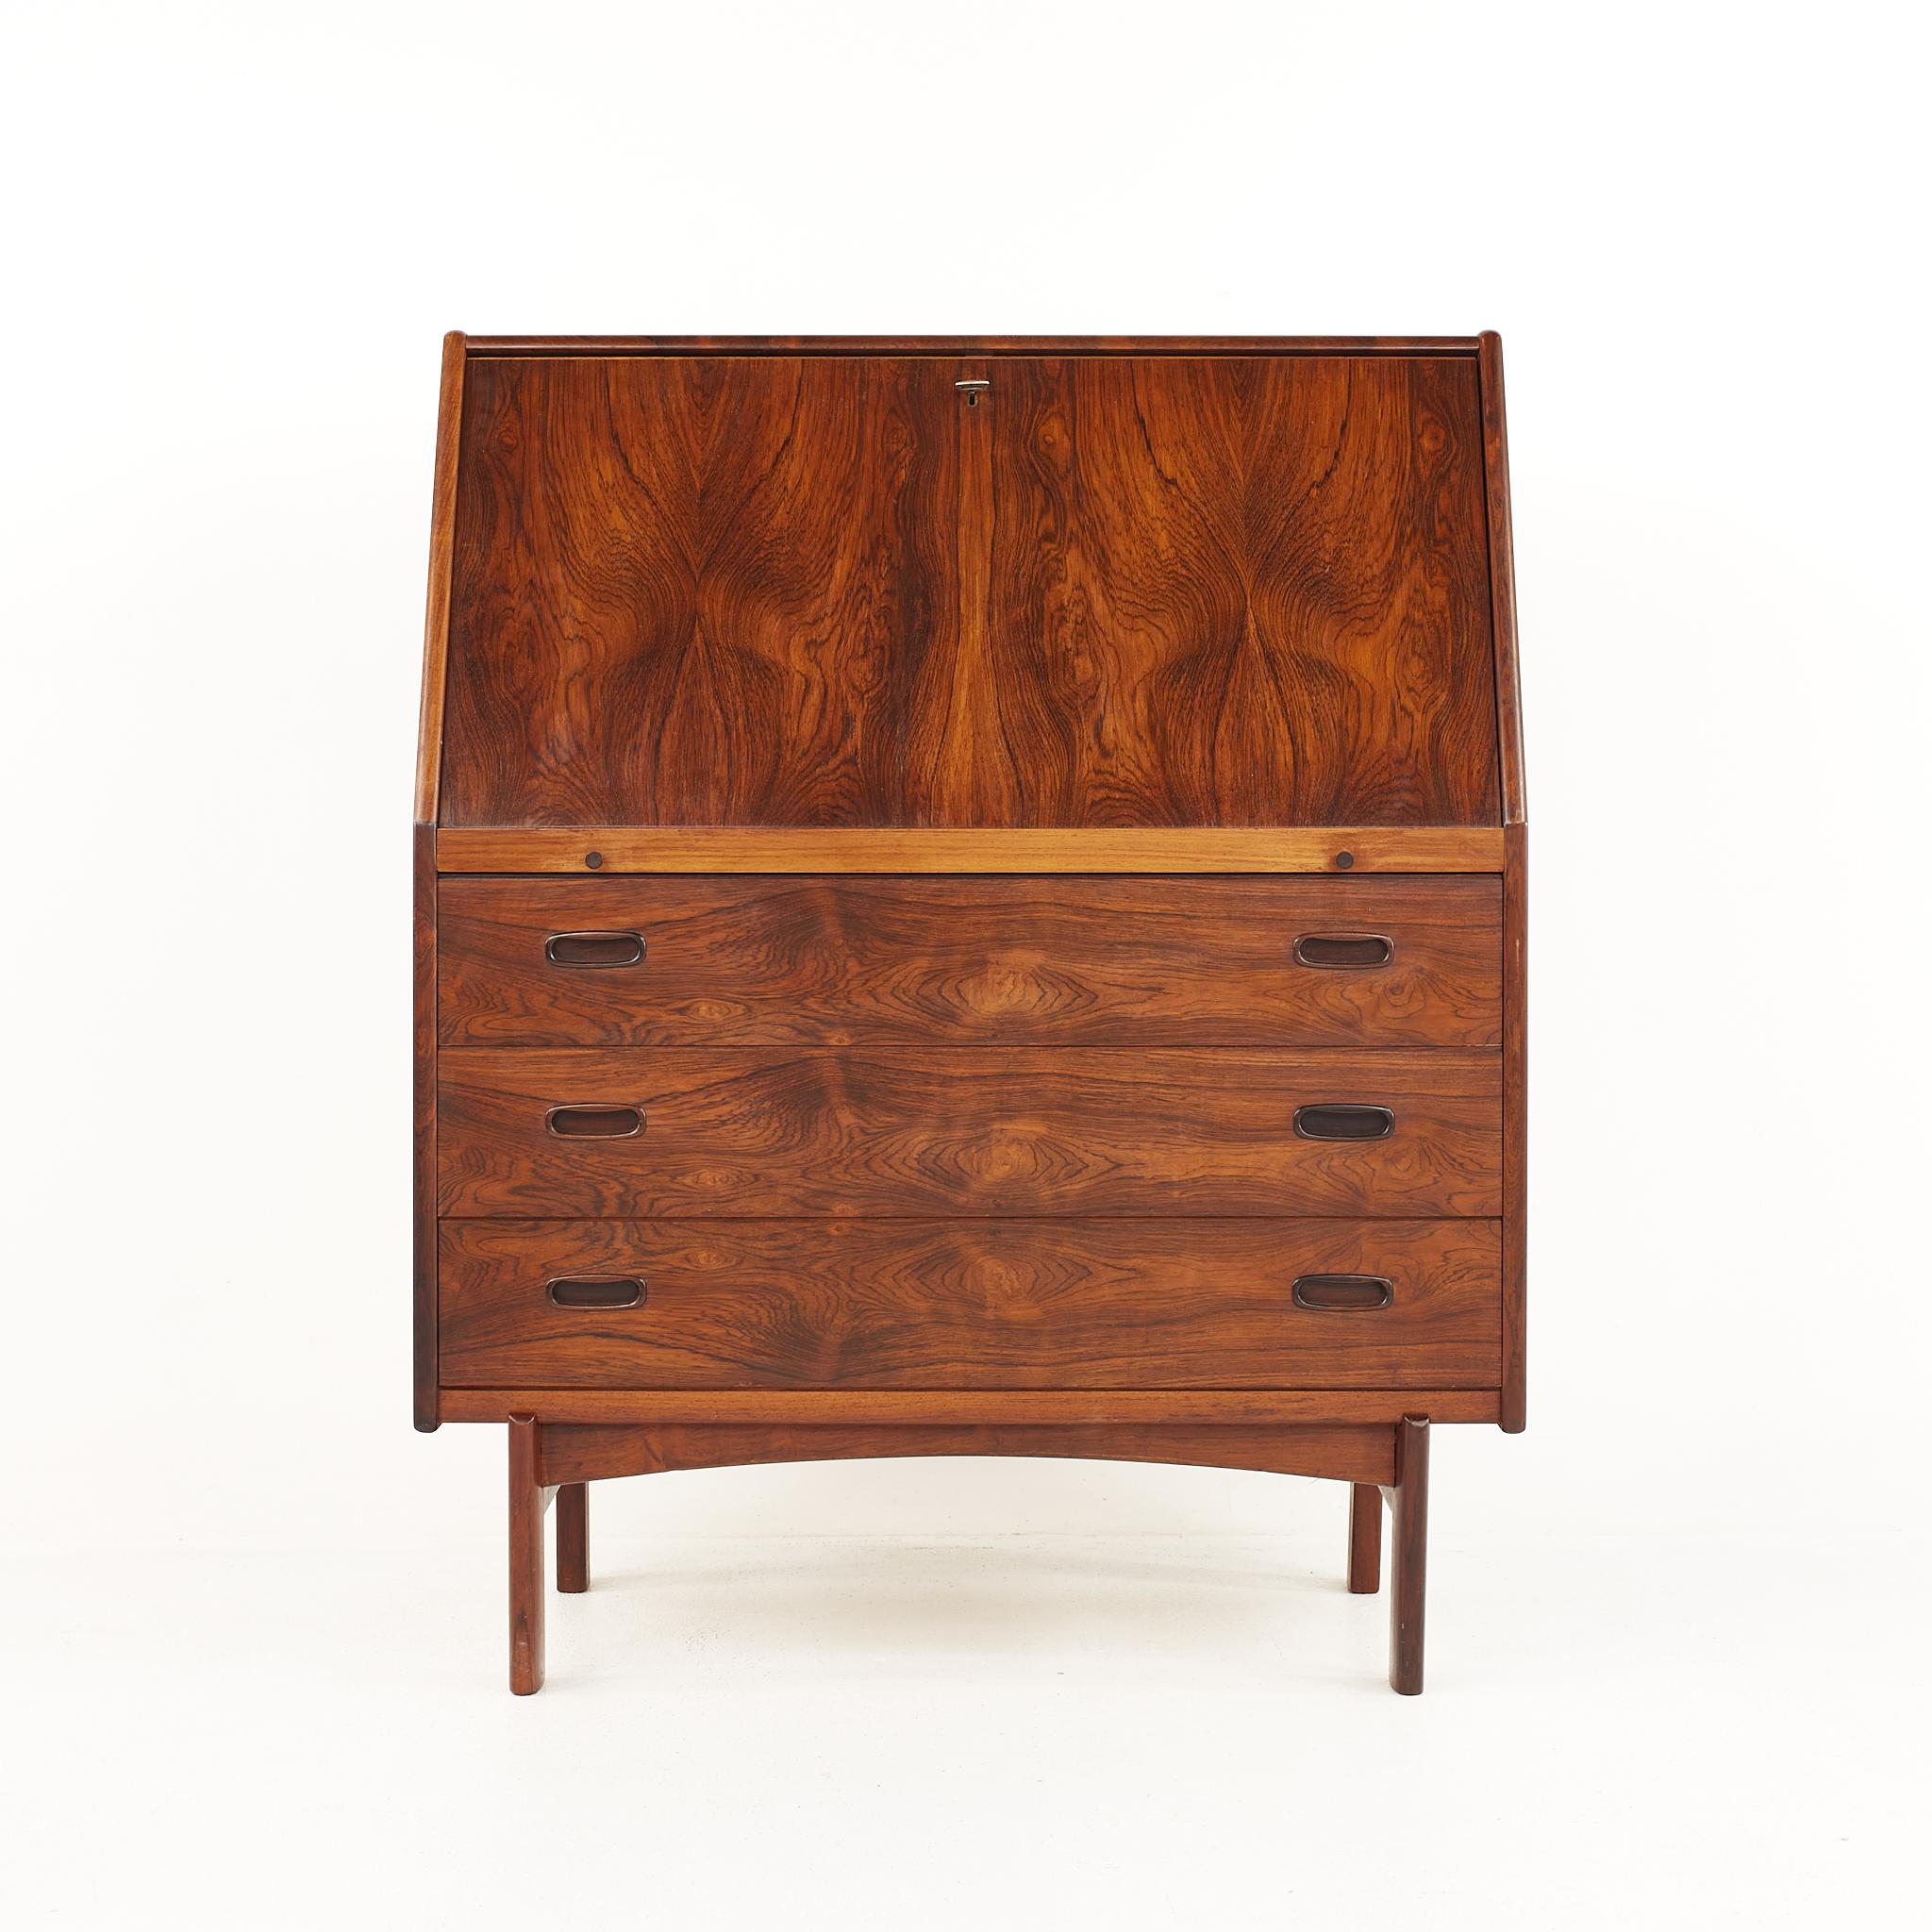 Bernhard Pedersen and Son mid century rosewood drop front secretary desk

The desk measures: 35.5 wide x 16.75 deep x 44.25 inches high

All pieces of furniture can be had in what we call restored vintage condition. That means the piece is